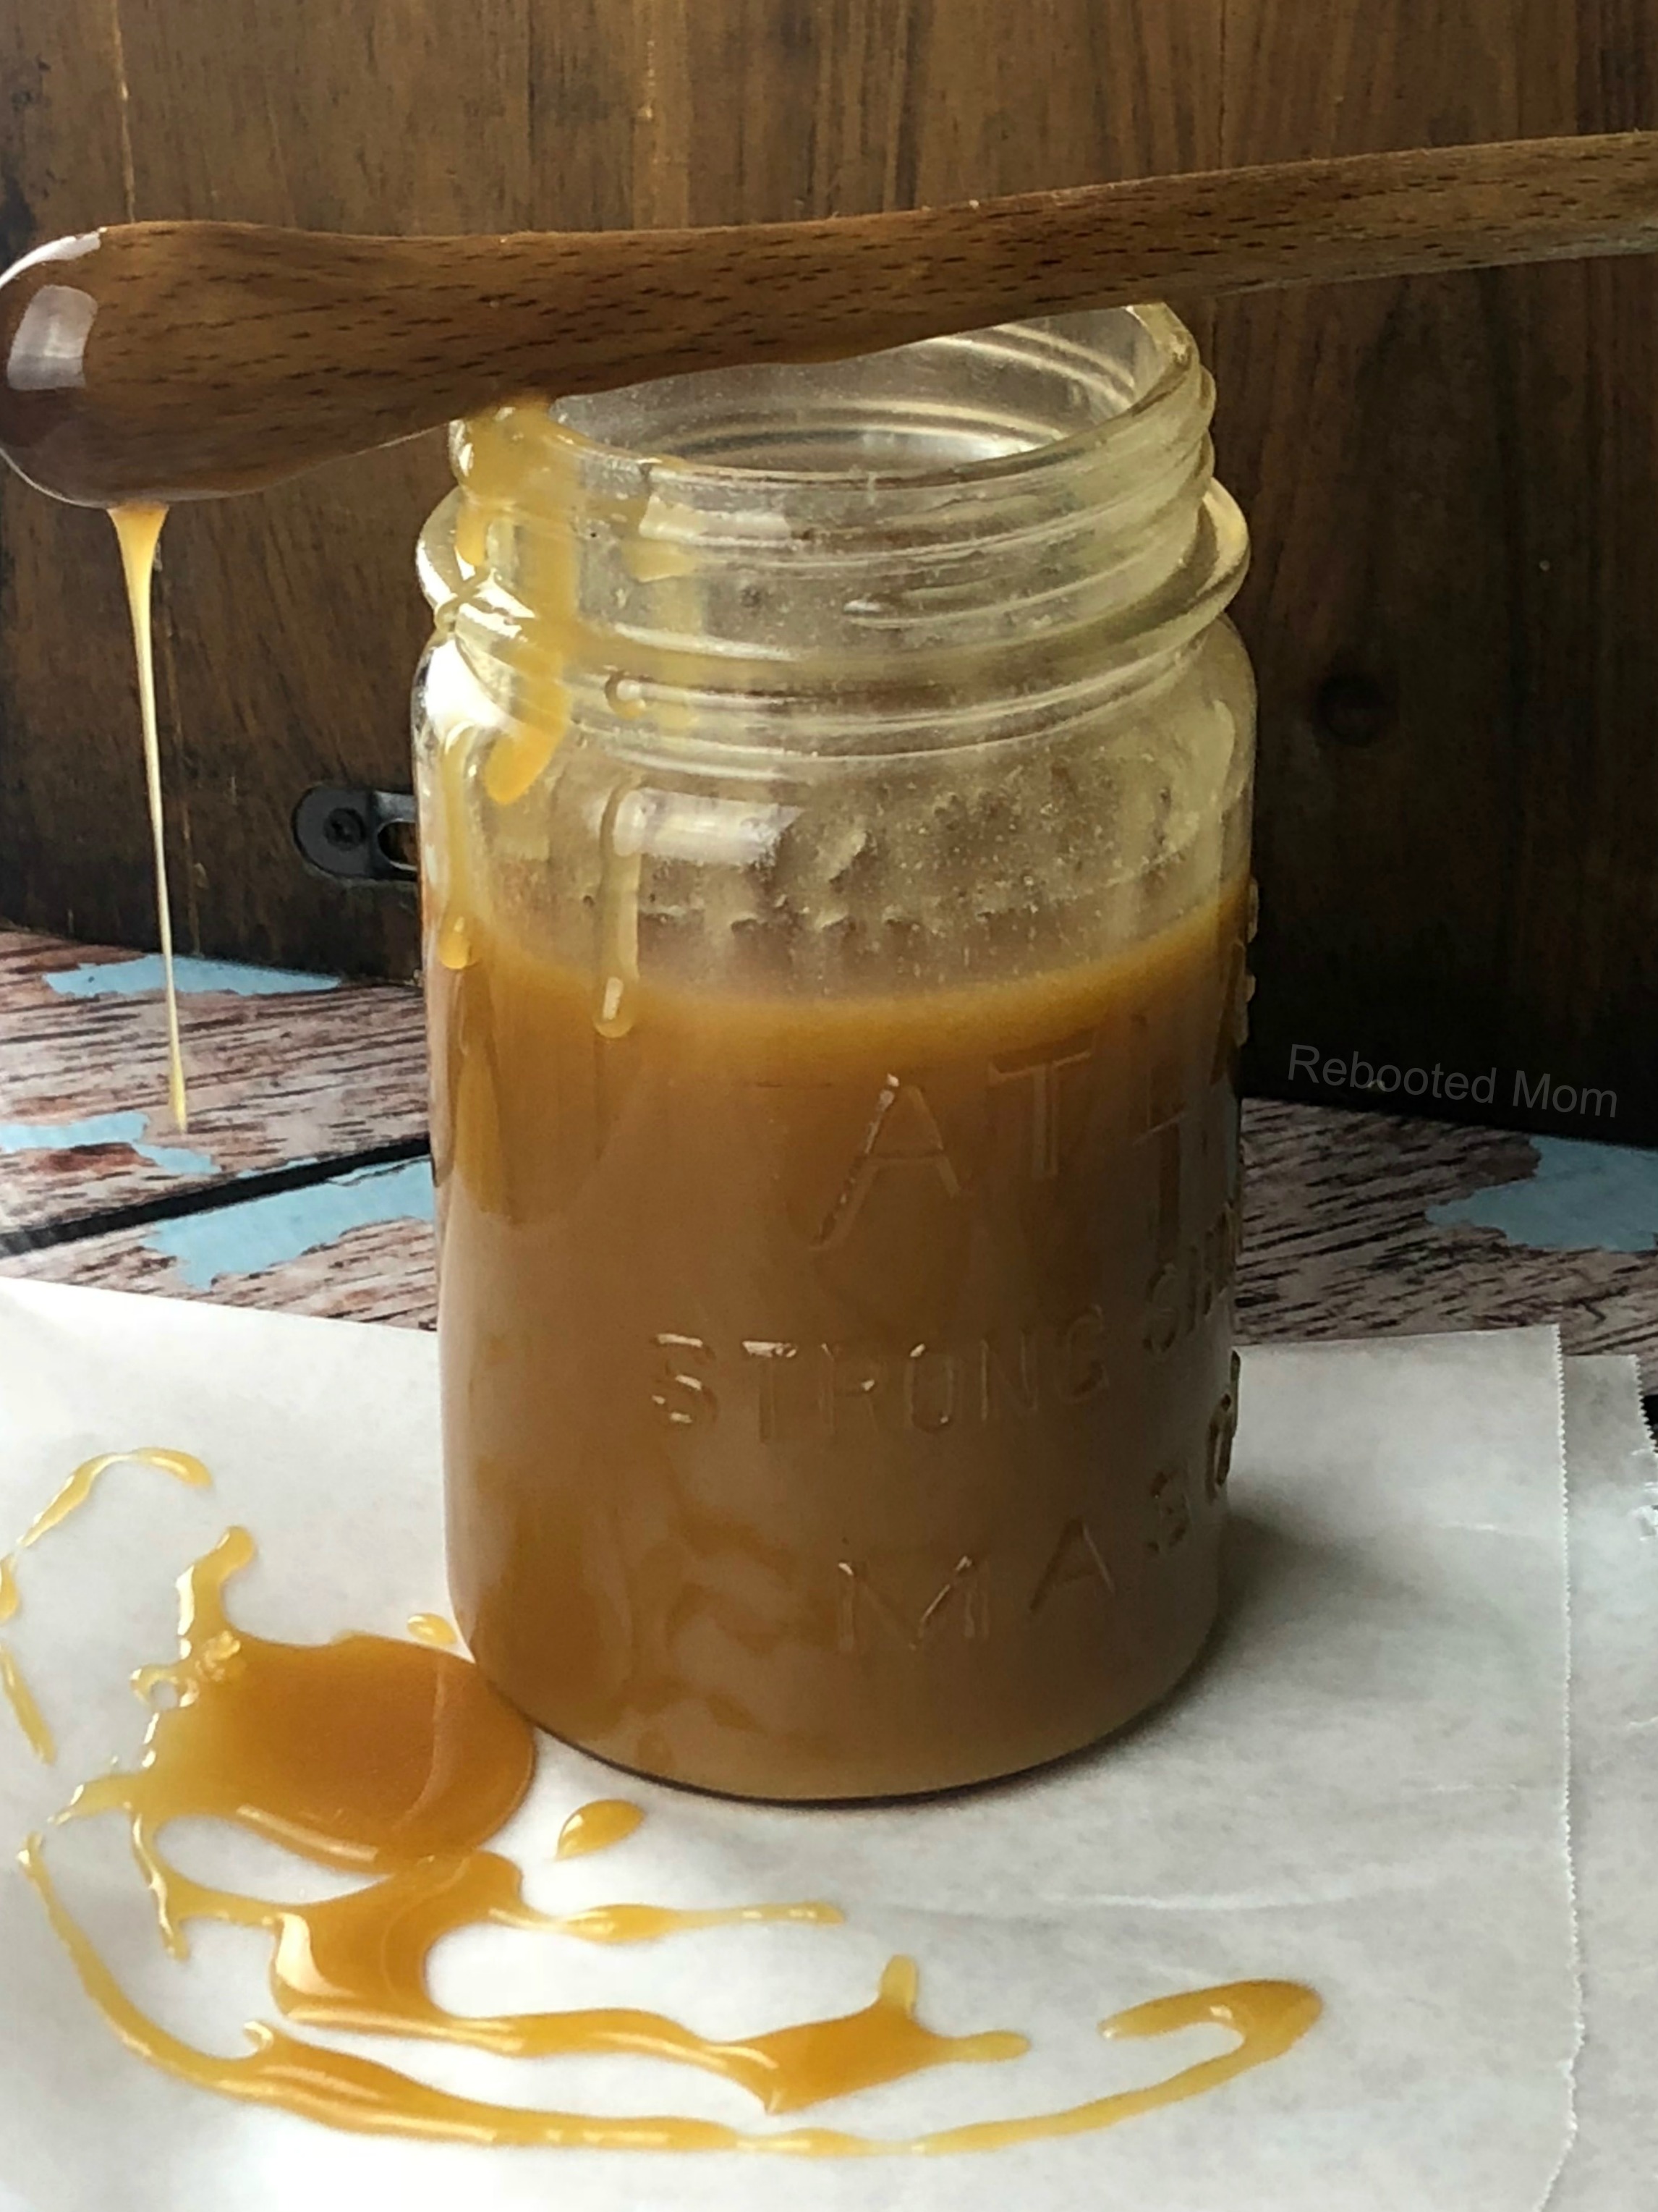 Use an abundance of whey to make this delicious whey caramel sauce, made quite easily at home with just a few simple ingredients!